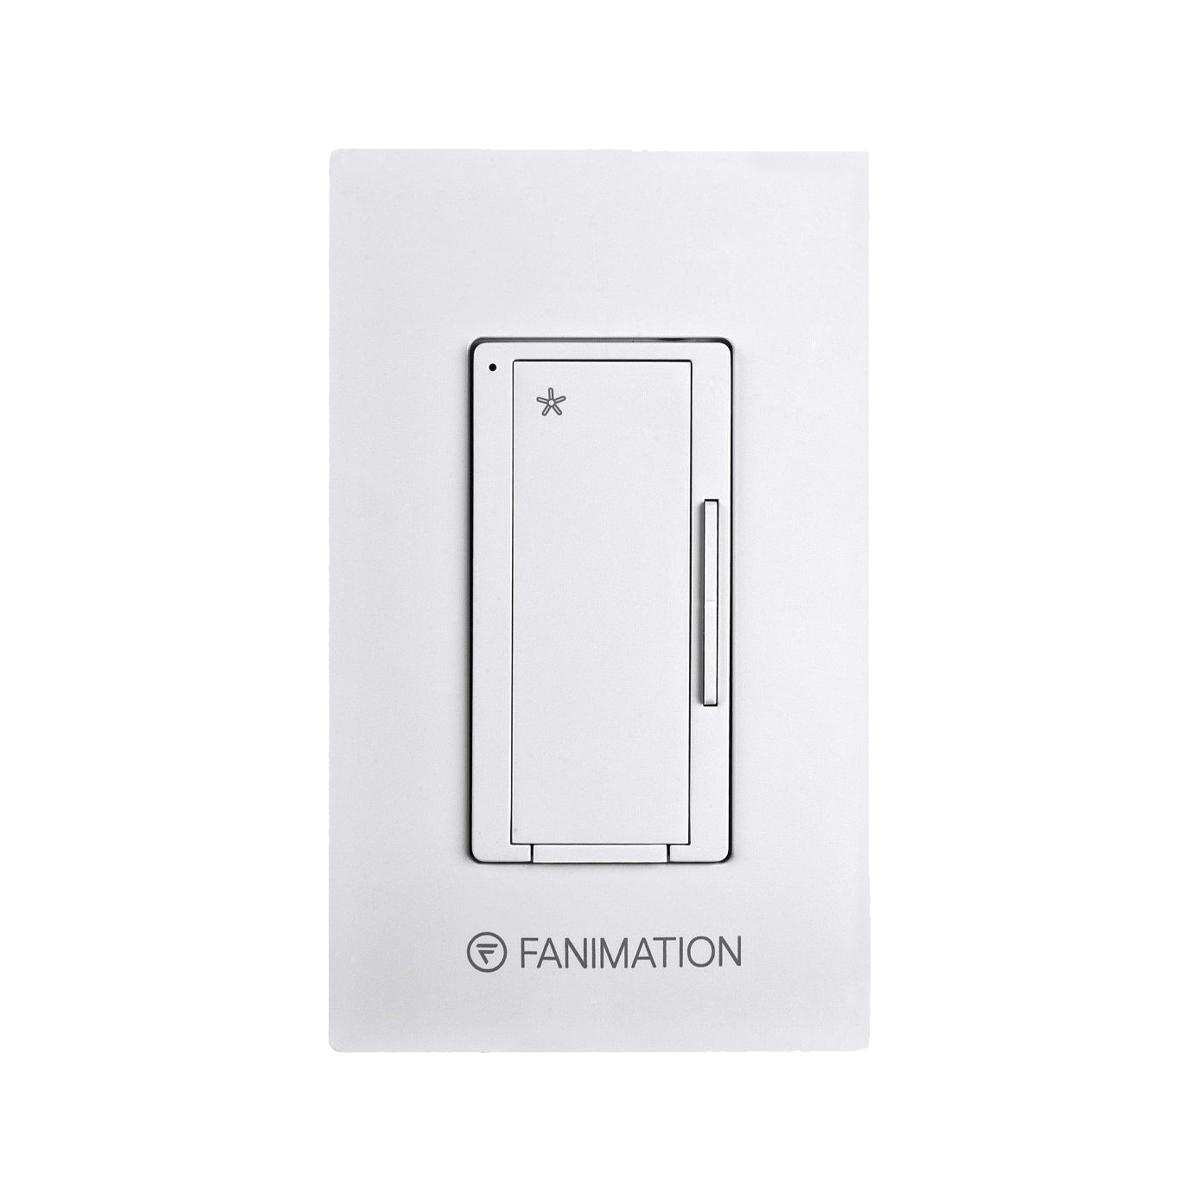 3-Speed Ceiling Fan Wall Control, White Finish - Bees Lighting